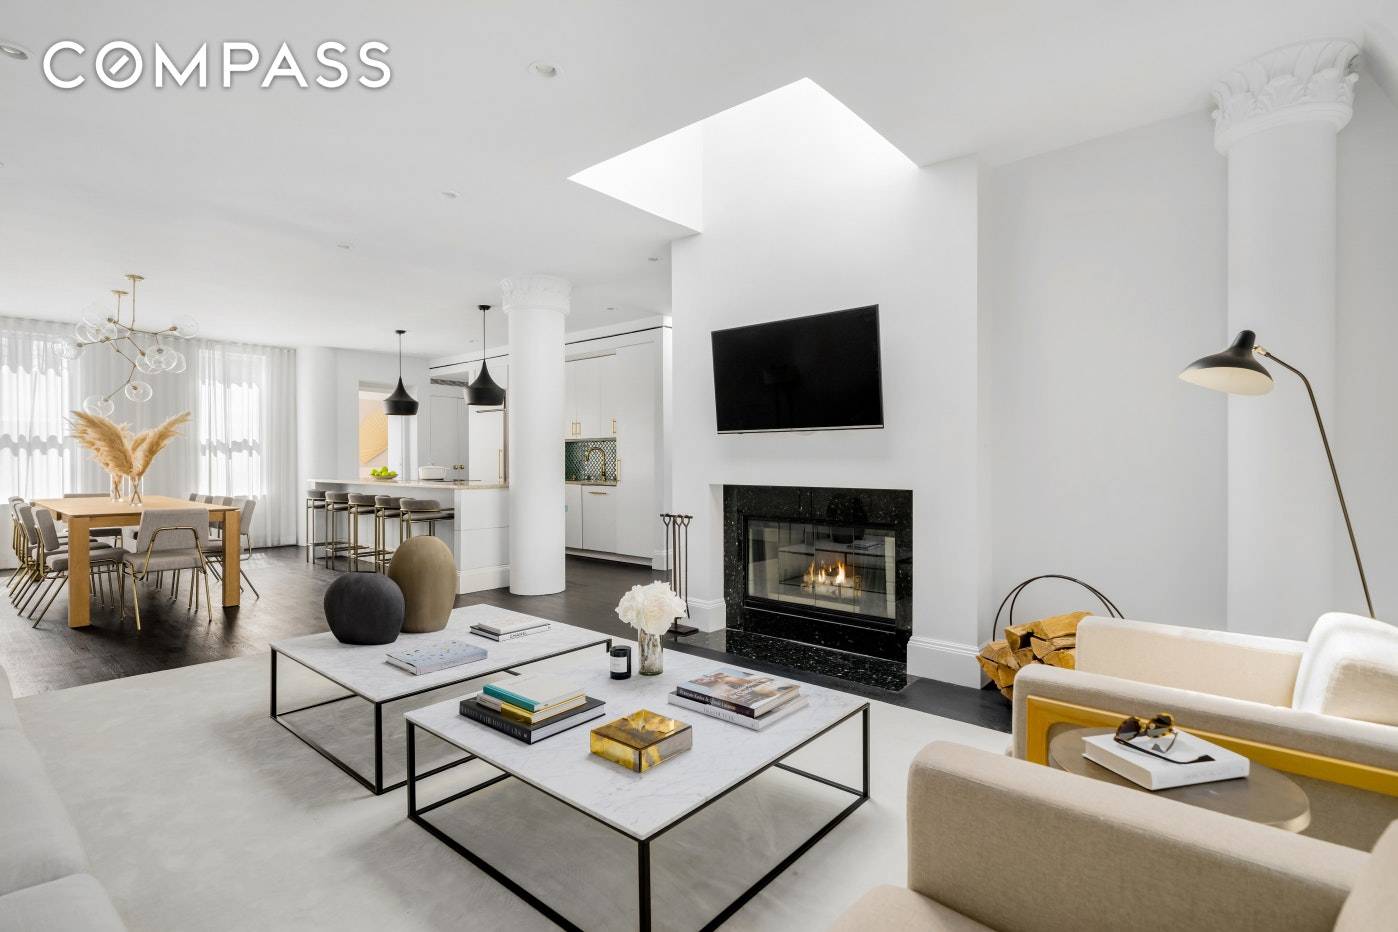 Spectacular penthouse on Greenwich Village's Gold Coast offers three bedrooms, two and a half bathrooms, and unparalleled design.